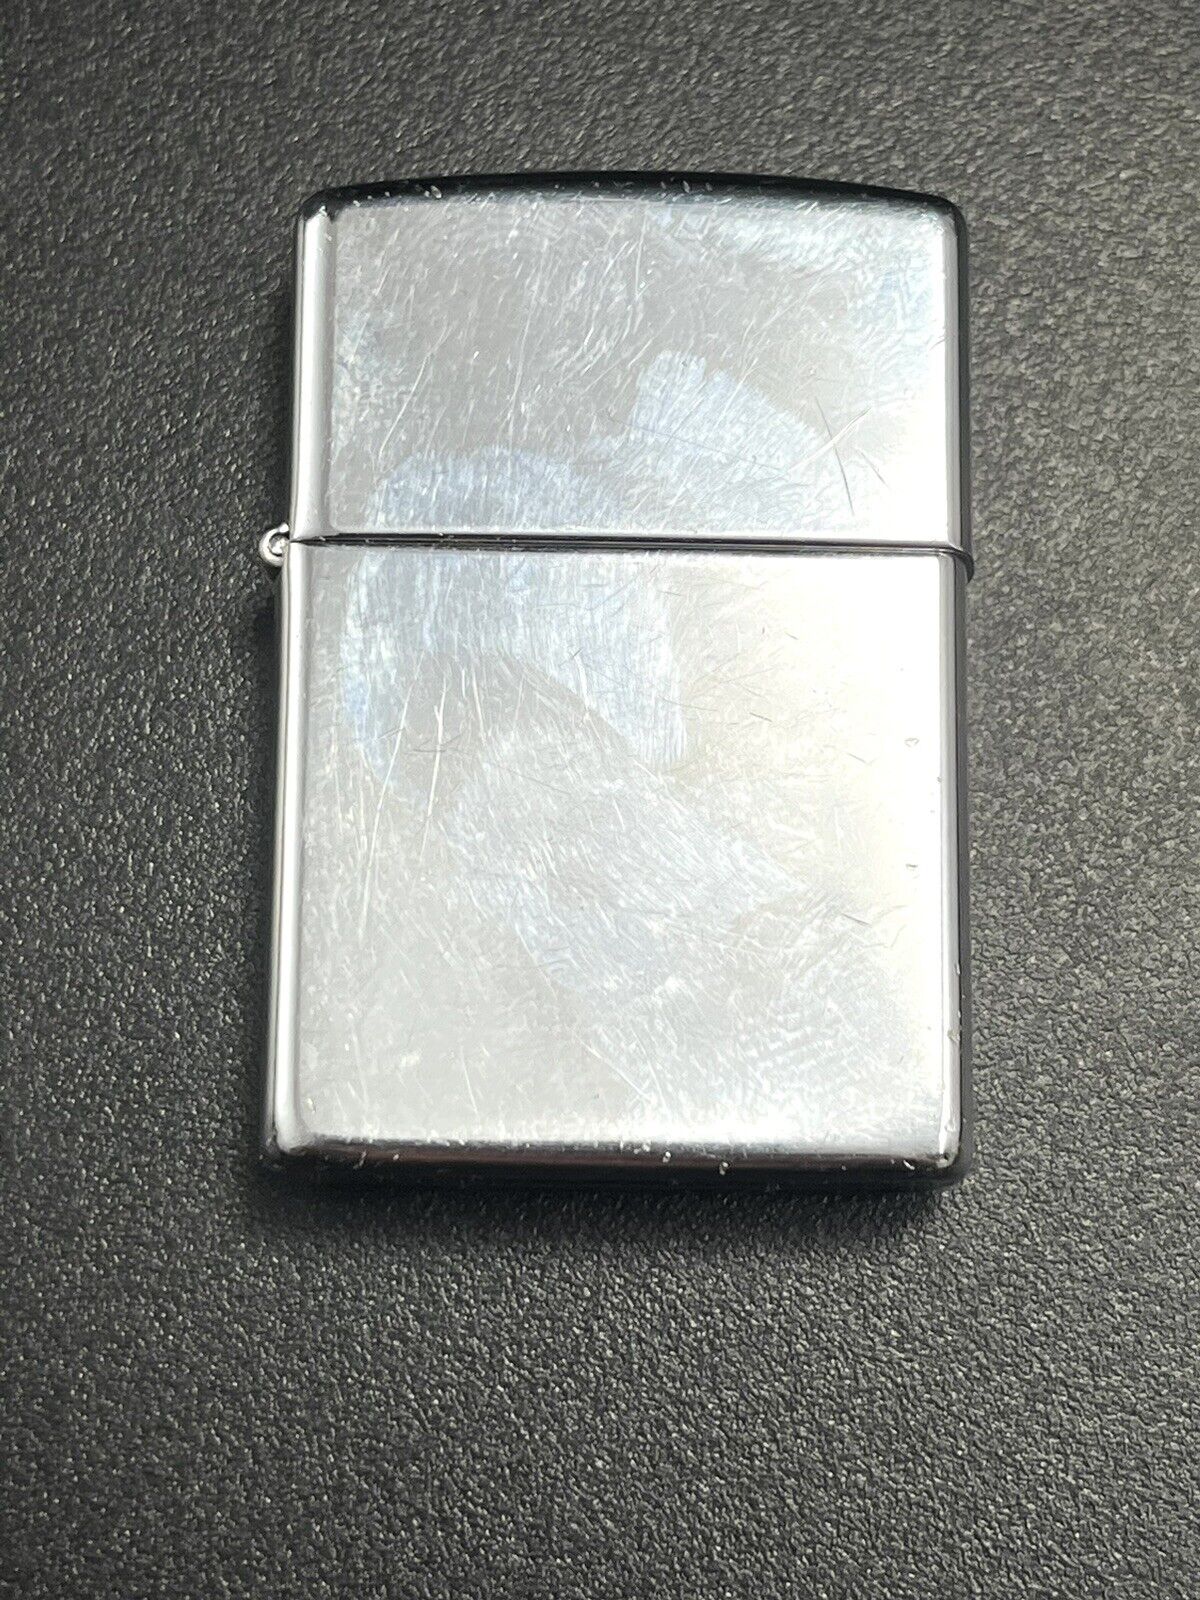 Vintage 1991 Zippo Lighter - Silver / Chrome Toned WORKS GREAT 